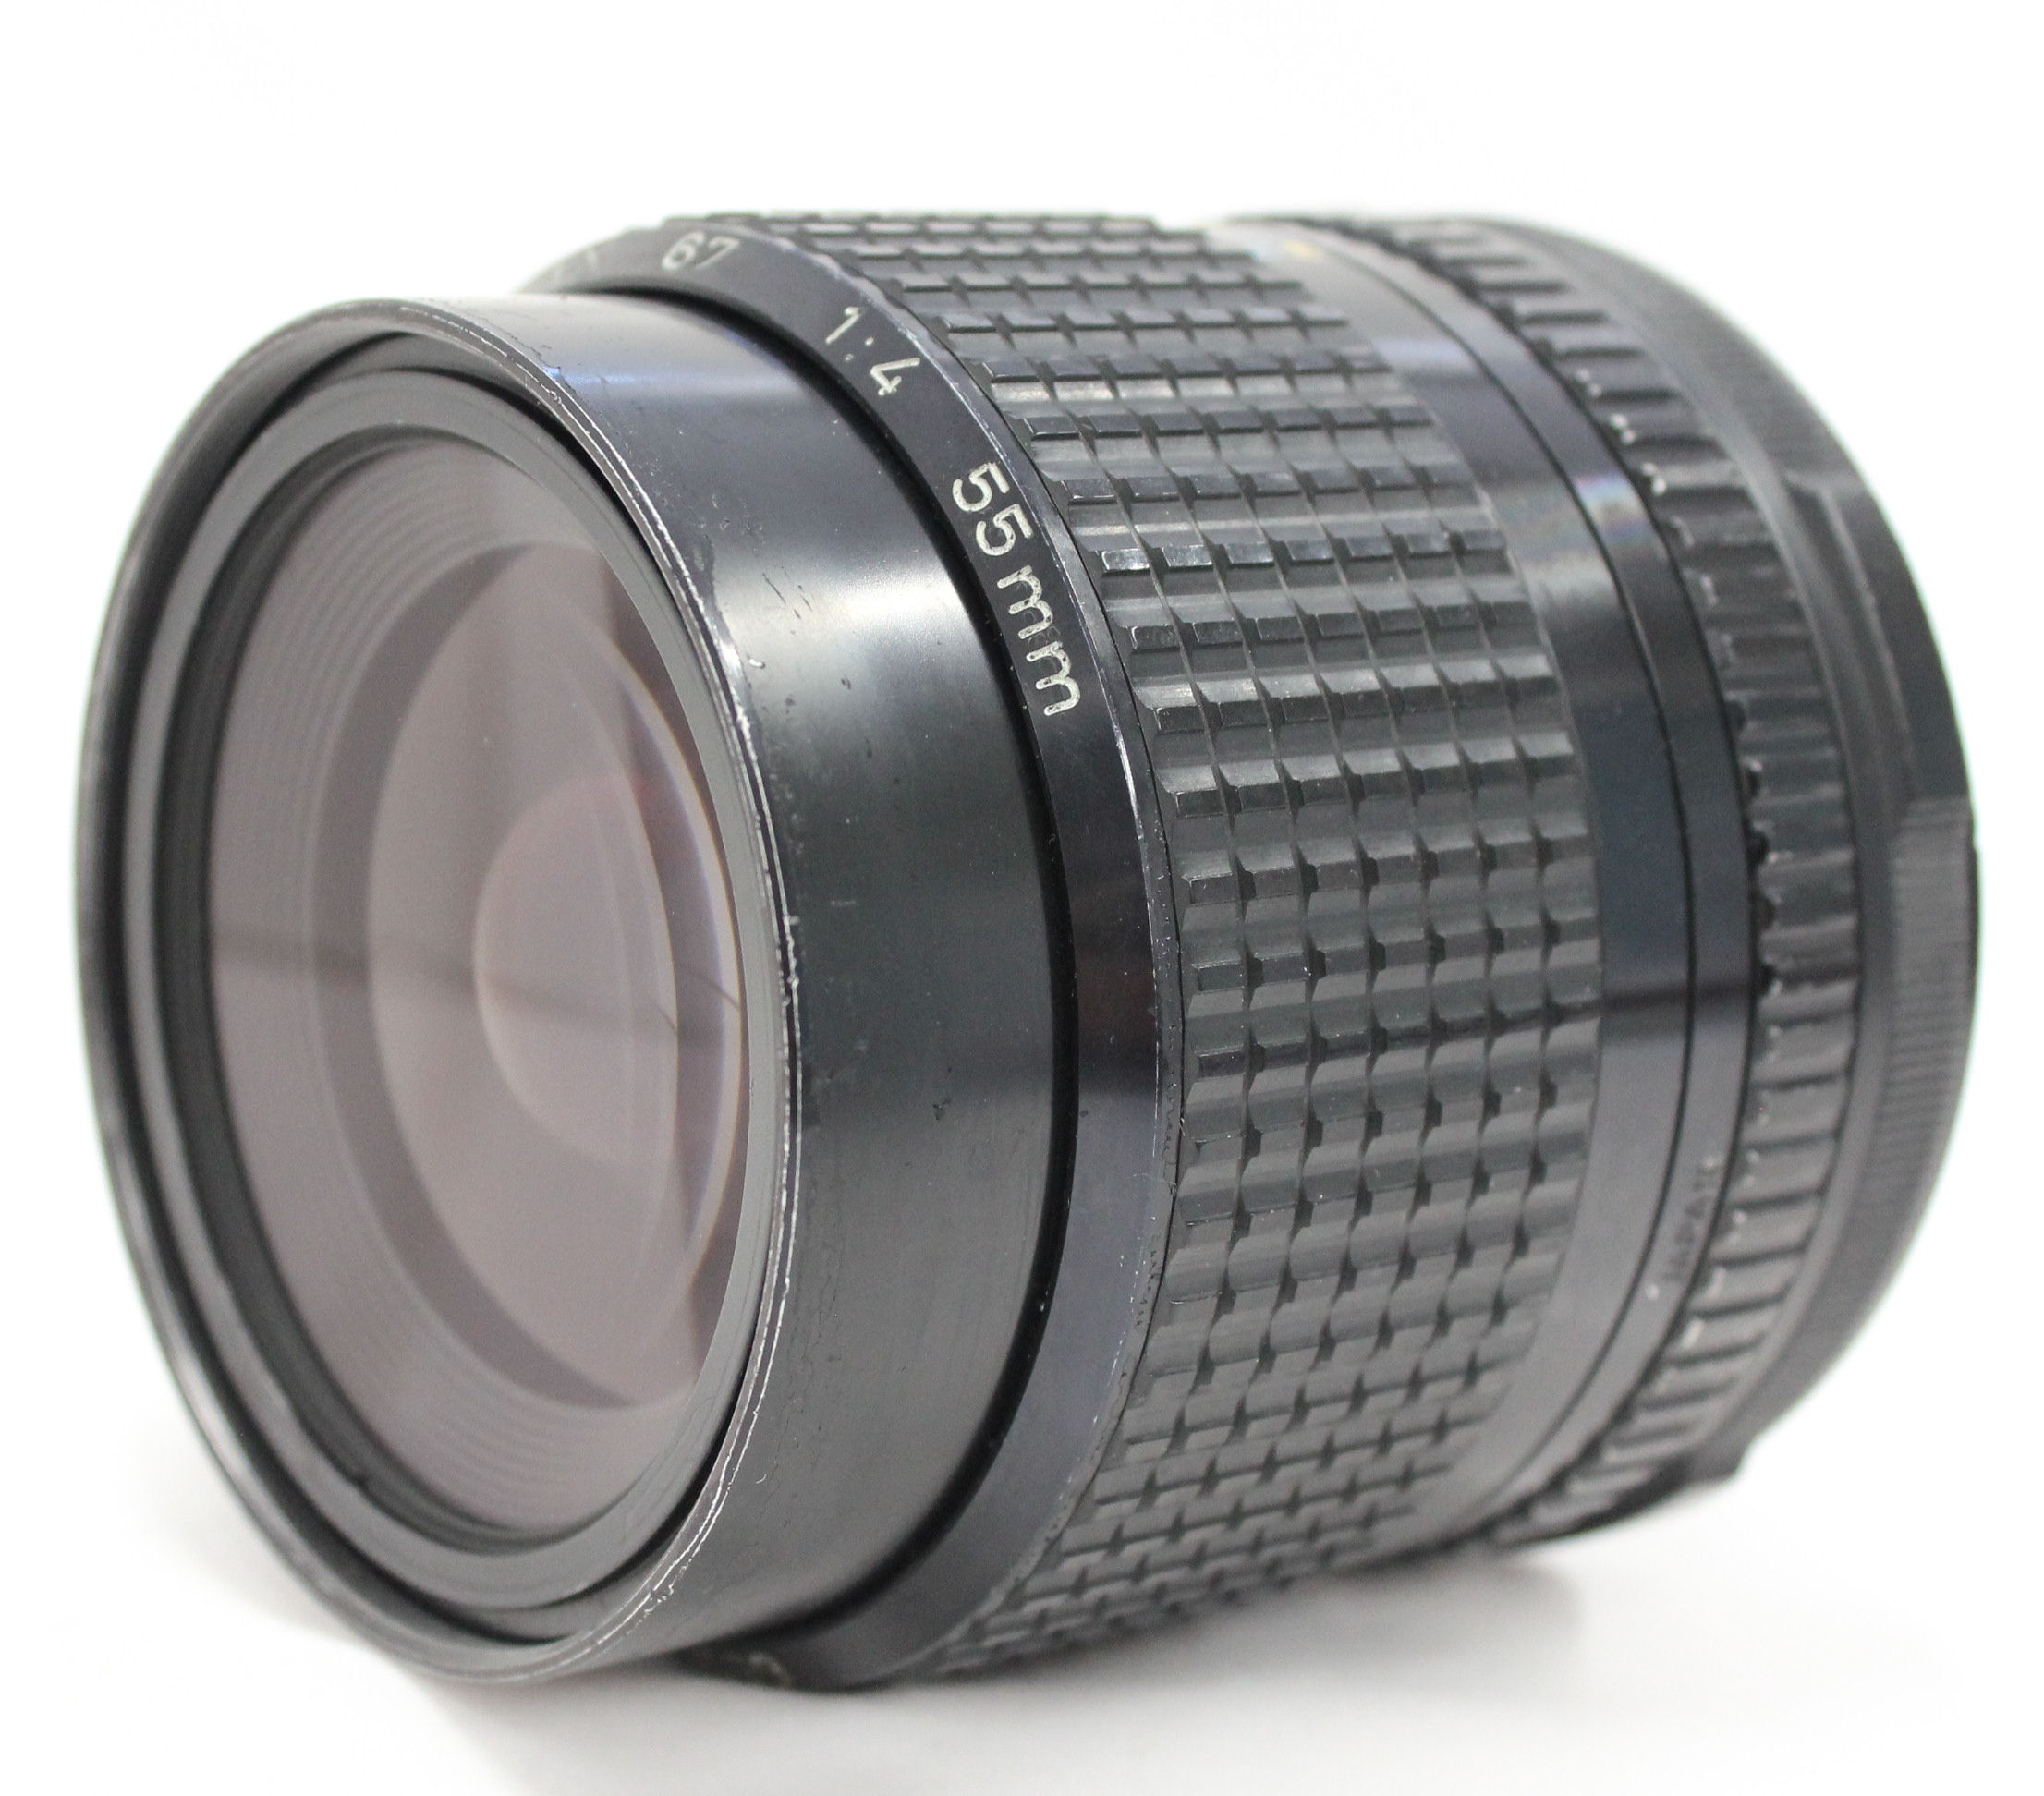  SMC Pentax 67 55mm F/4 Lens for Pentax 67 67II from Japan Photo 1